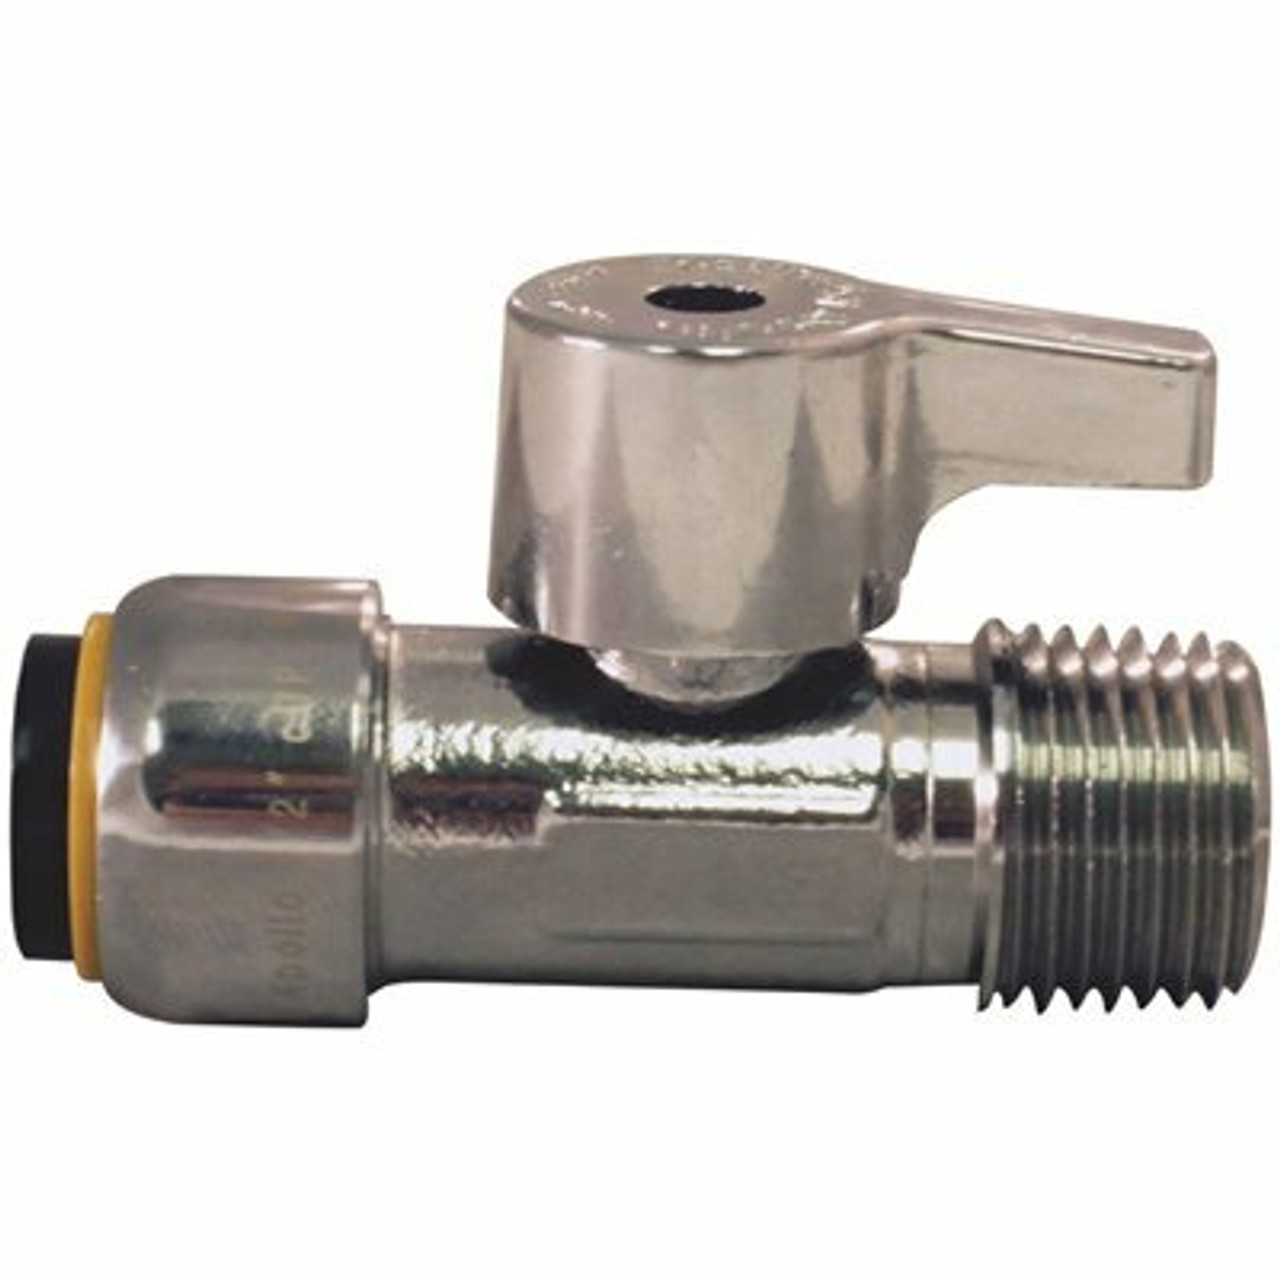 Tectite 1/2 In. Chrome Plated Brass Push-To-Connect X 1/2 In. Mnpt Quarter Turn Straight Stop Valve